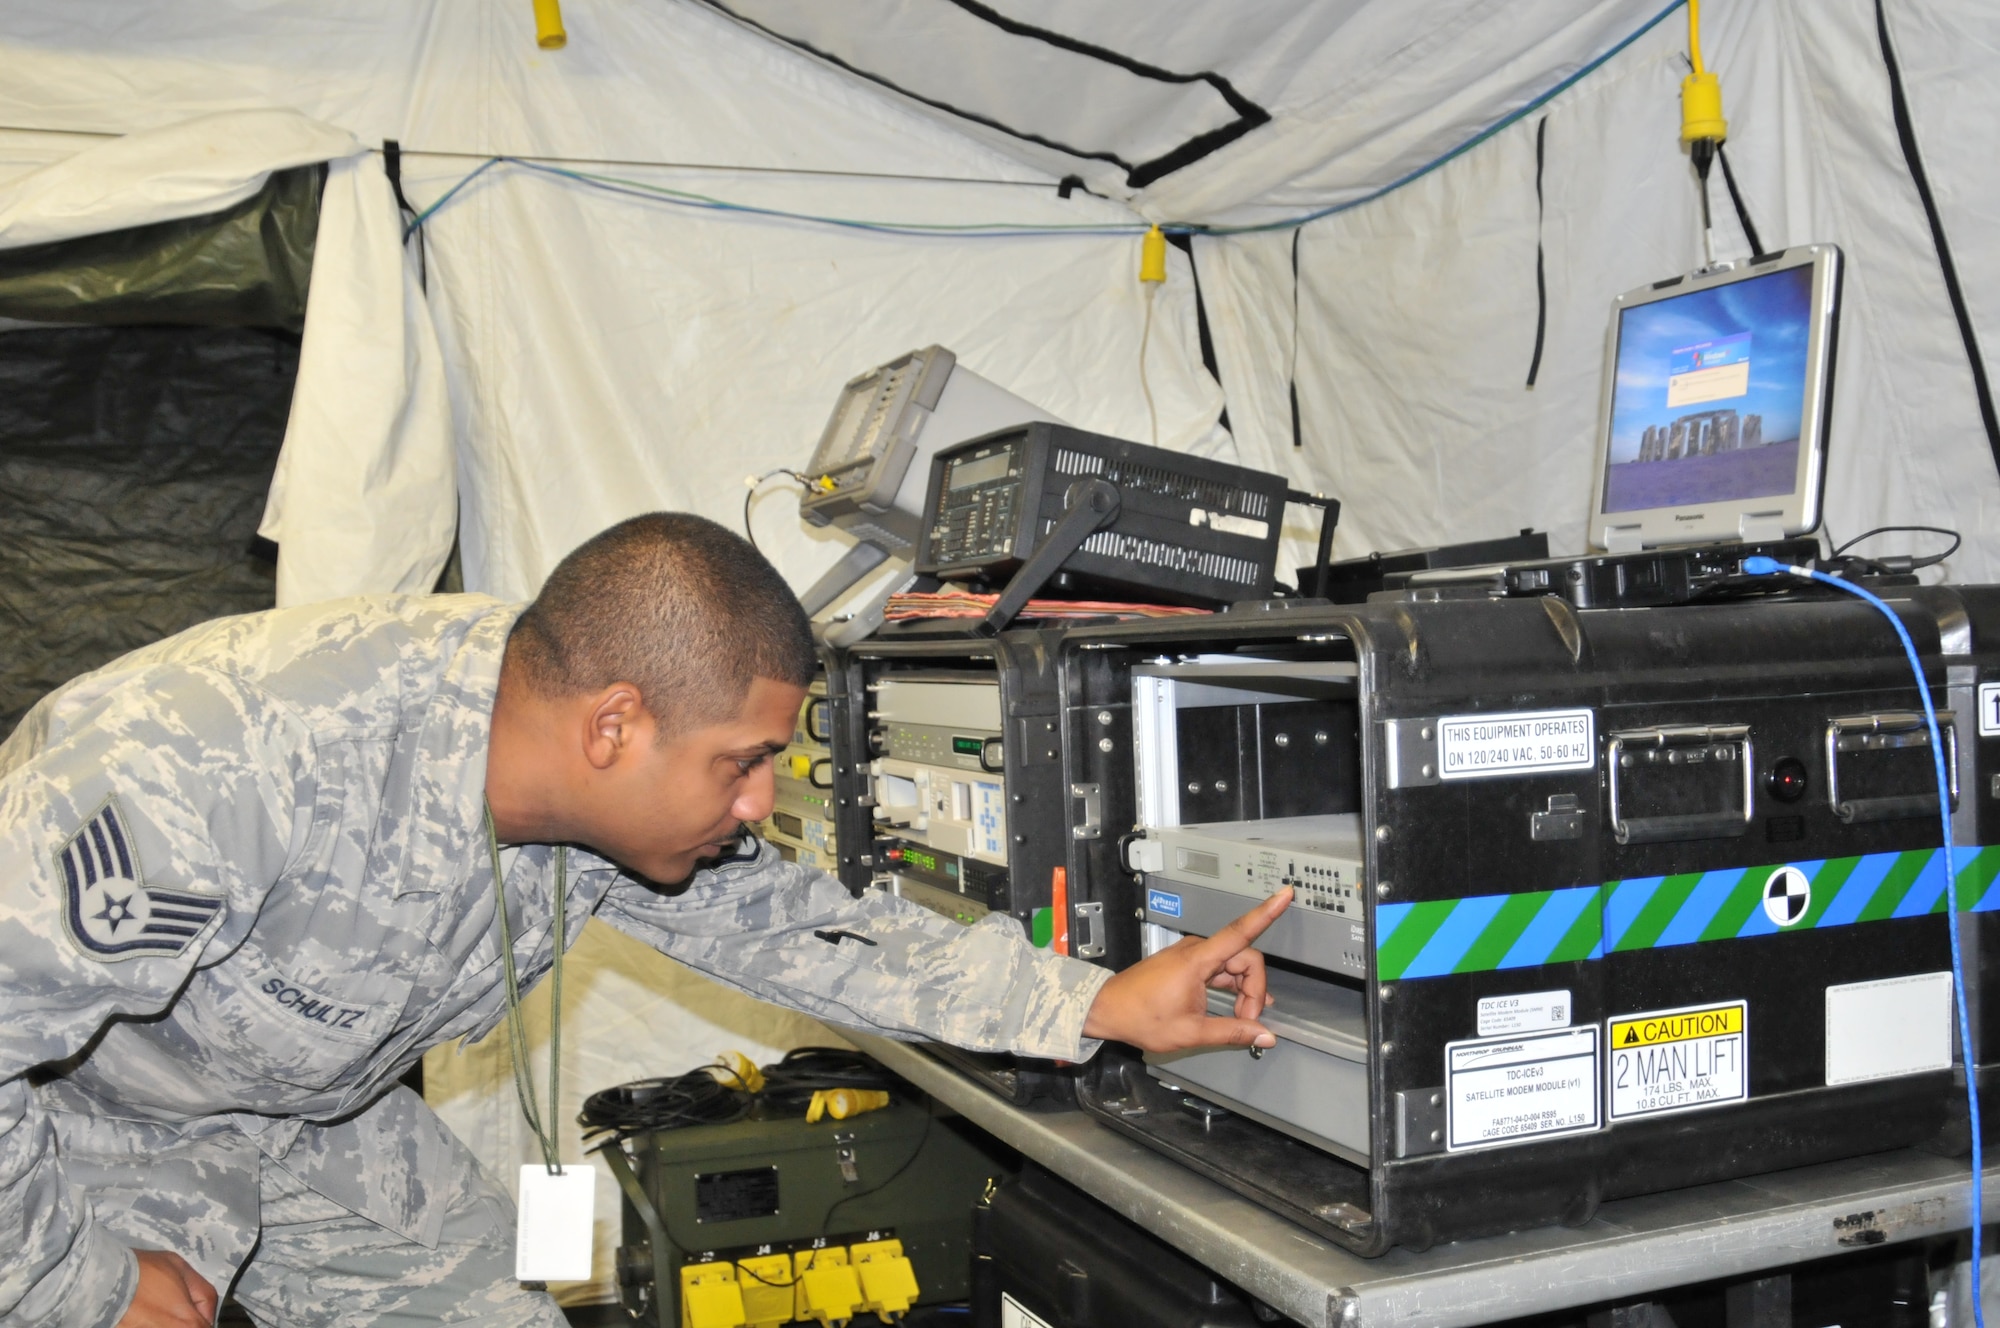 Staff Sgt. Daniel Schultz, 1st Combat Communications Squadron radio frequency transmissions systems supervisor, checks equipment on Campia Turzii Air Base, Romania. The 1st CBCS is responsible for setting up and maintaining all phone and computer systems for Operation Golden Lance, a partnership-building exercise conducted with the Romanian Air Force. (U.S. Air Force photo/Senior Airman David Dobrydney)